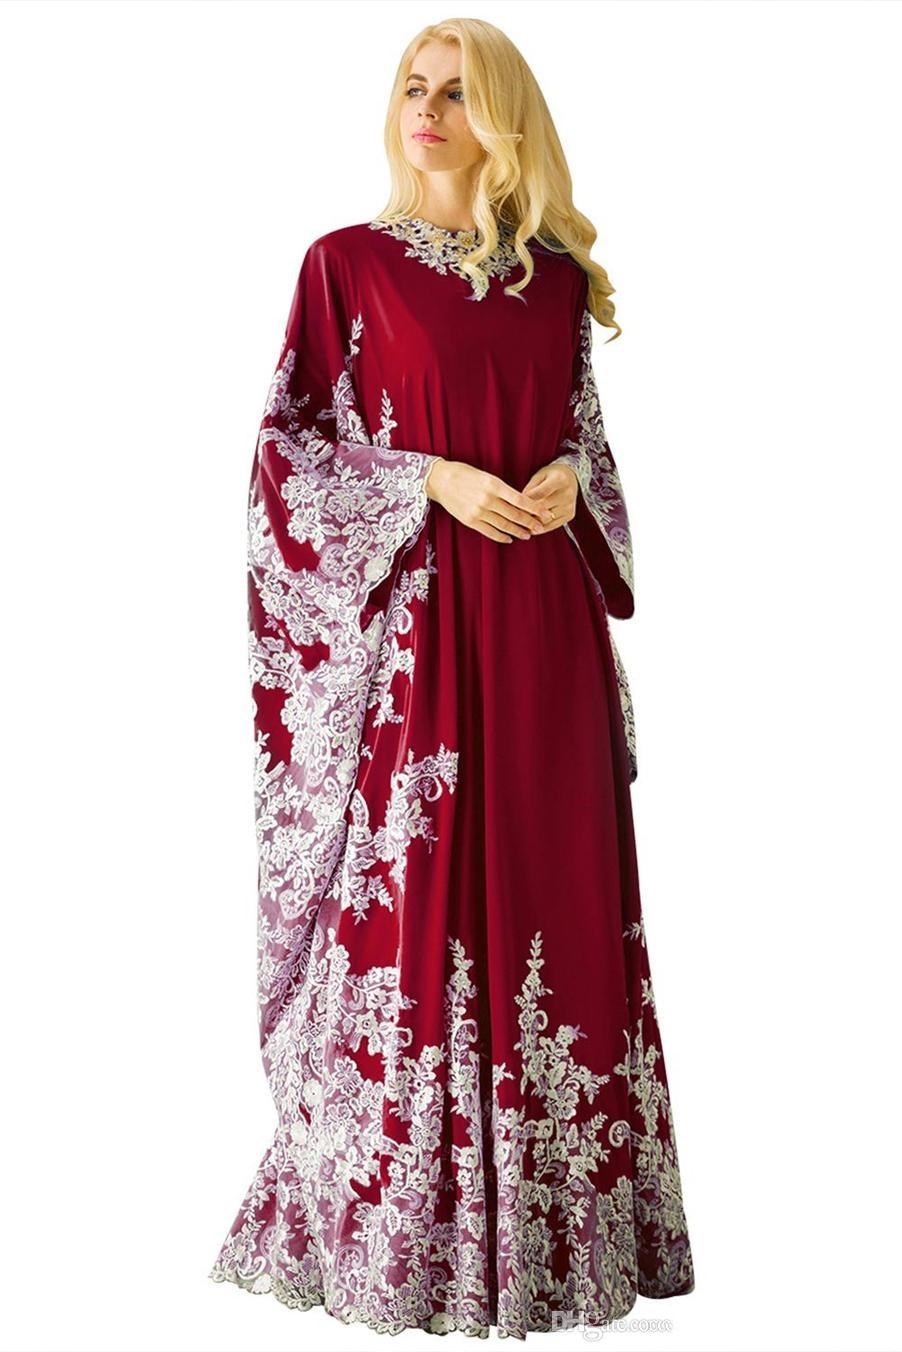 Image of New Saudi Arabic Green Evening Dresses Long Sleeves Gowns Lace Applique Plus Size Prom Wear Elegant